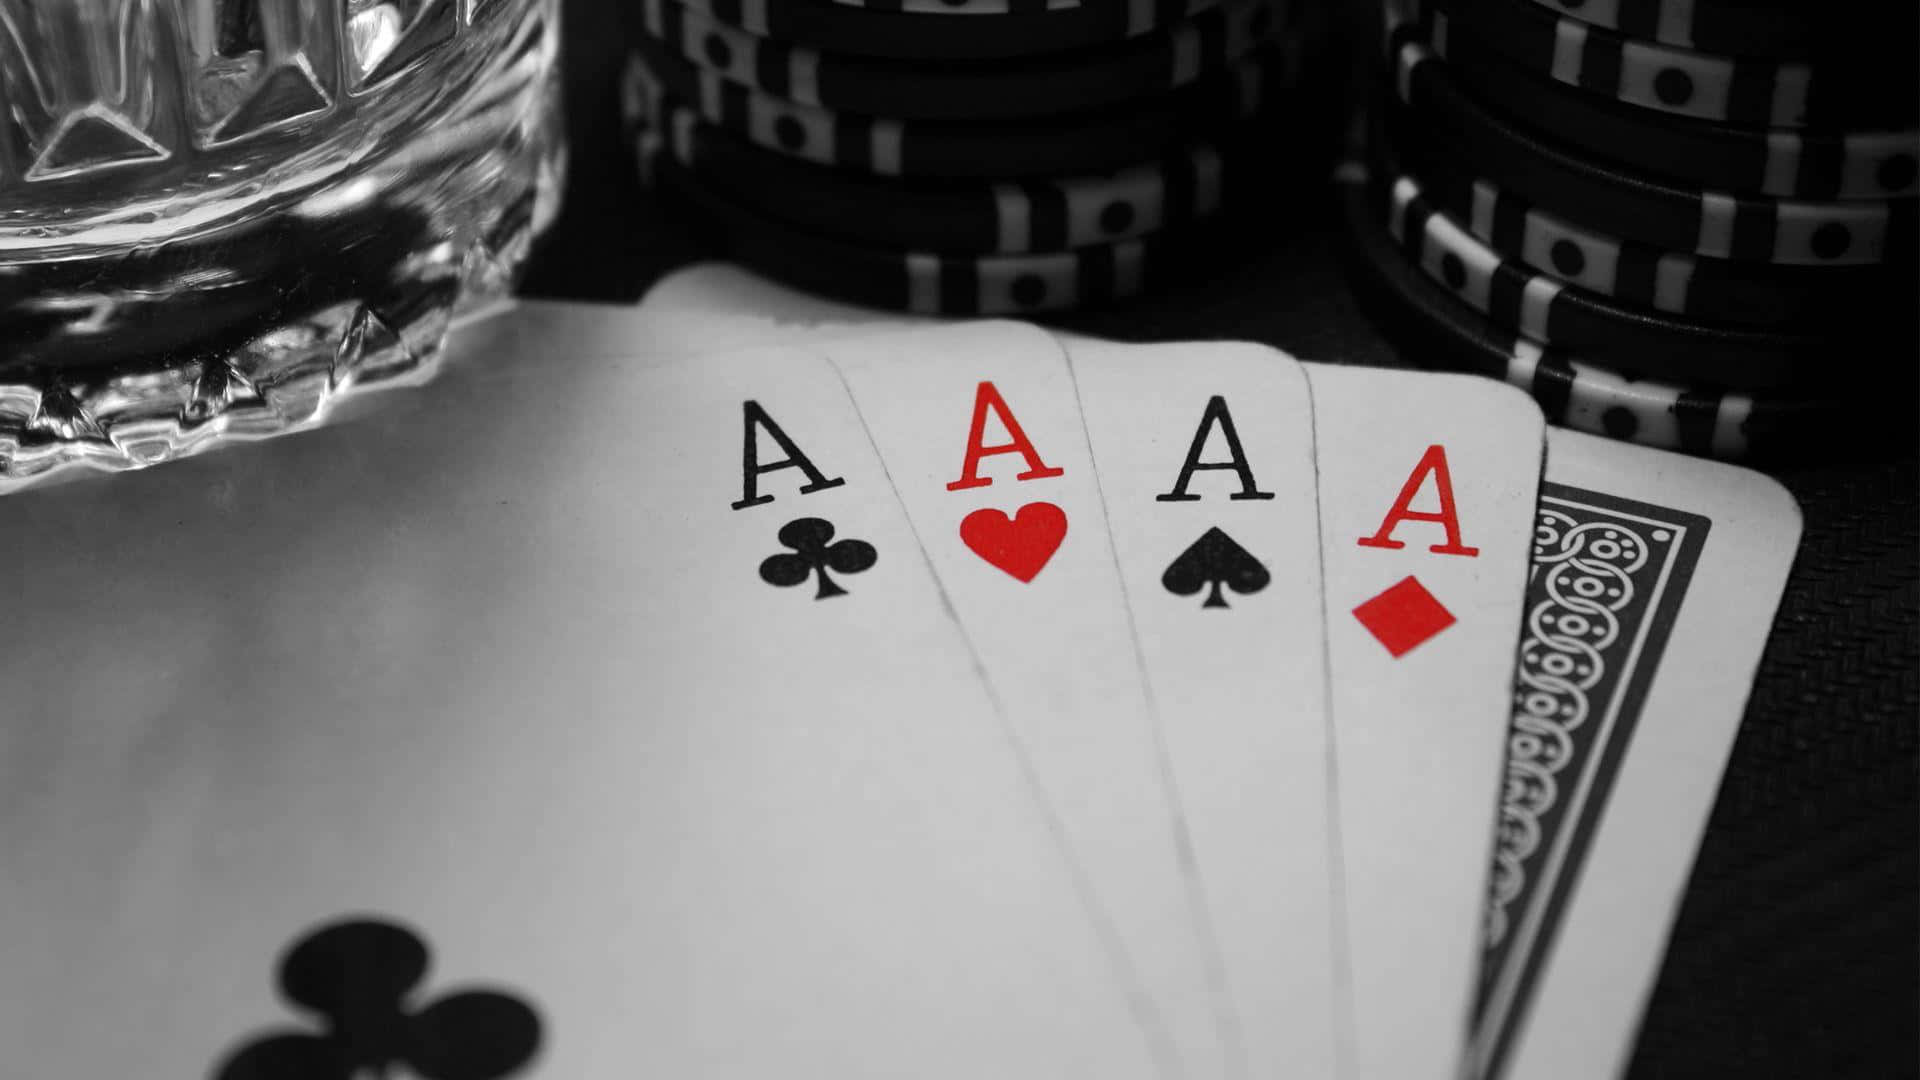 “Raise the stakes this Poker Night”